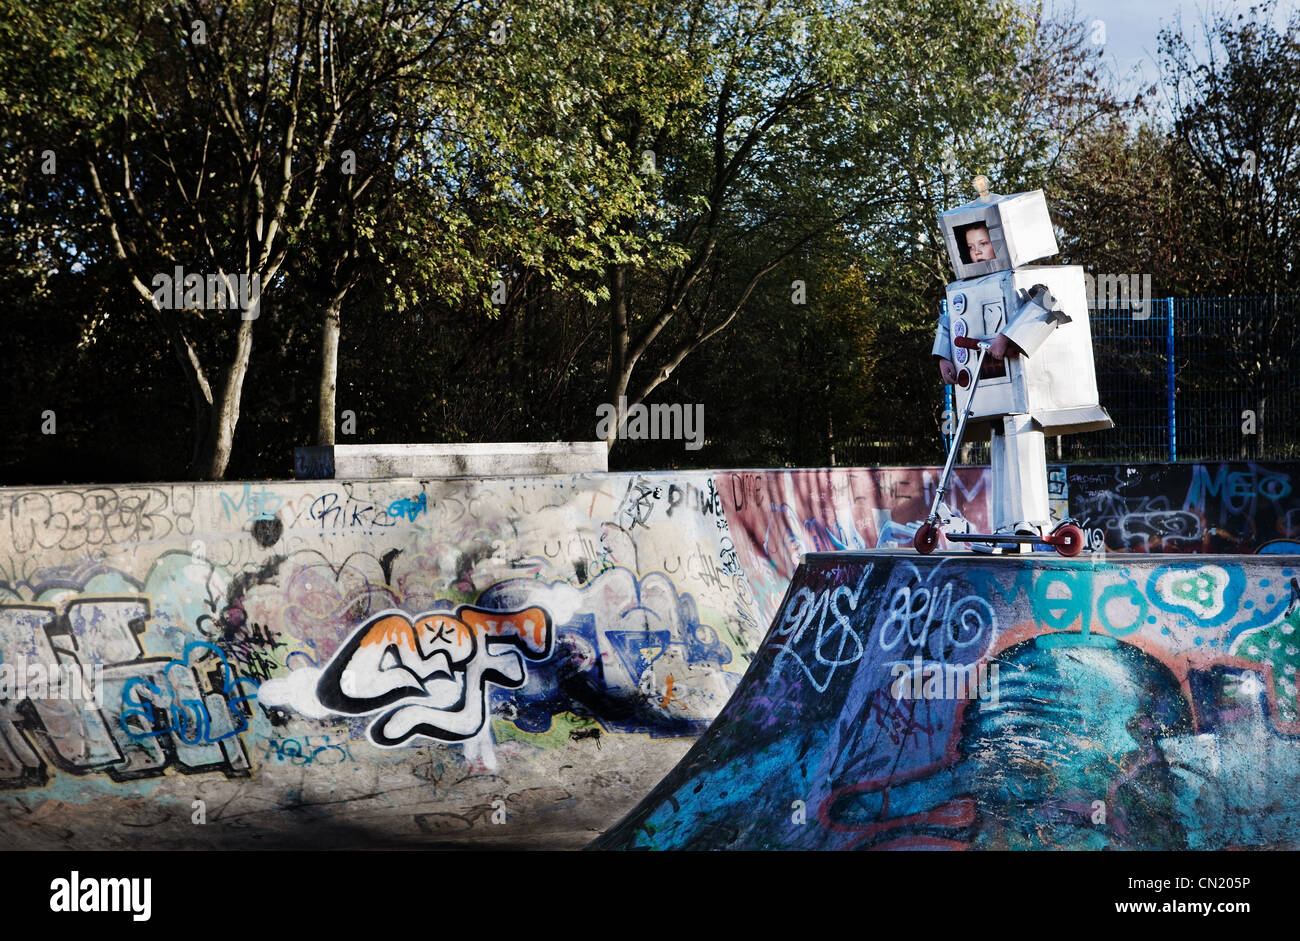 Boy dressed as robot in skate park Stock Photo